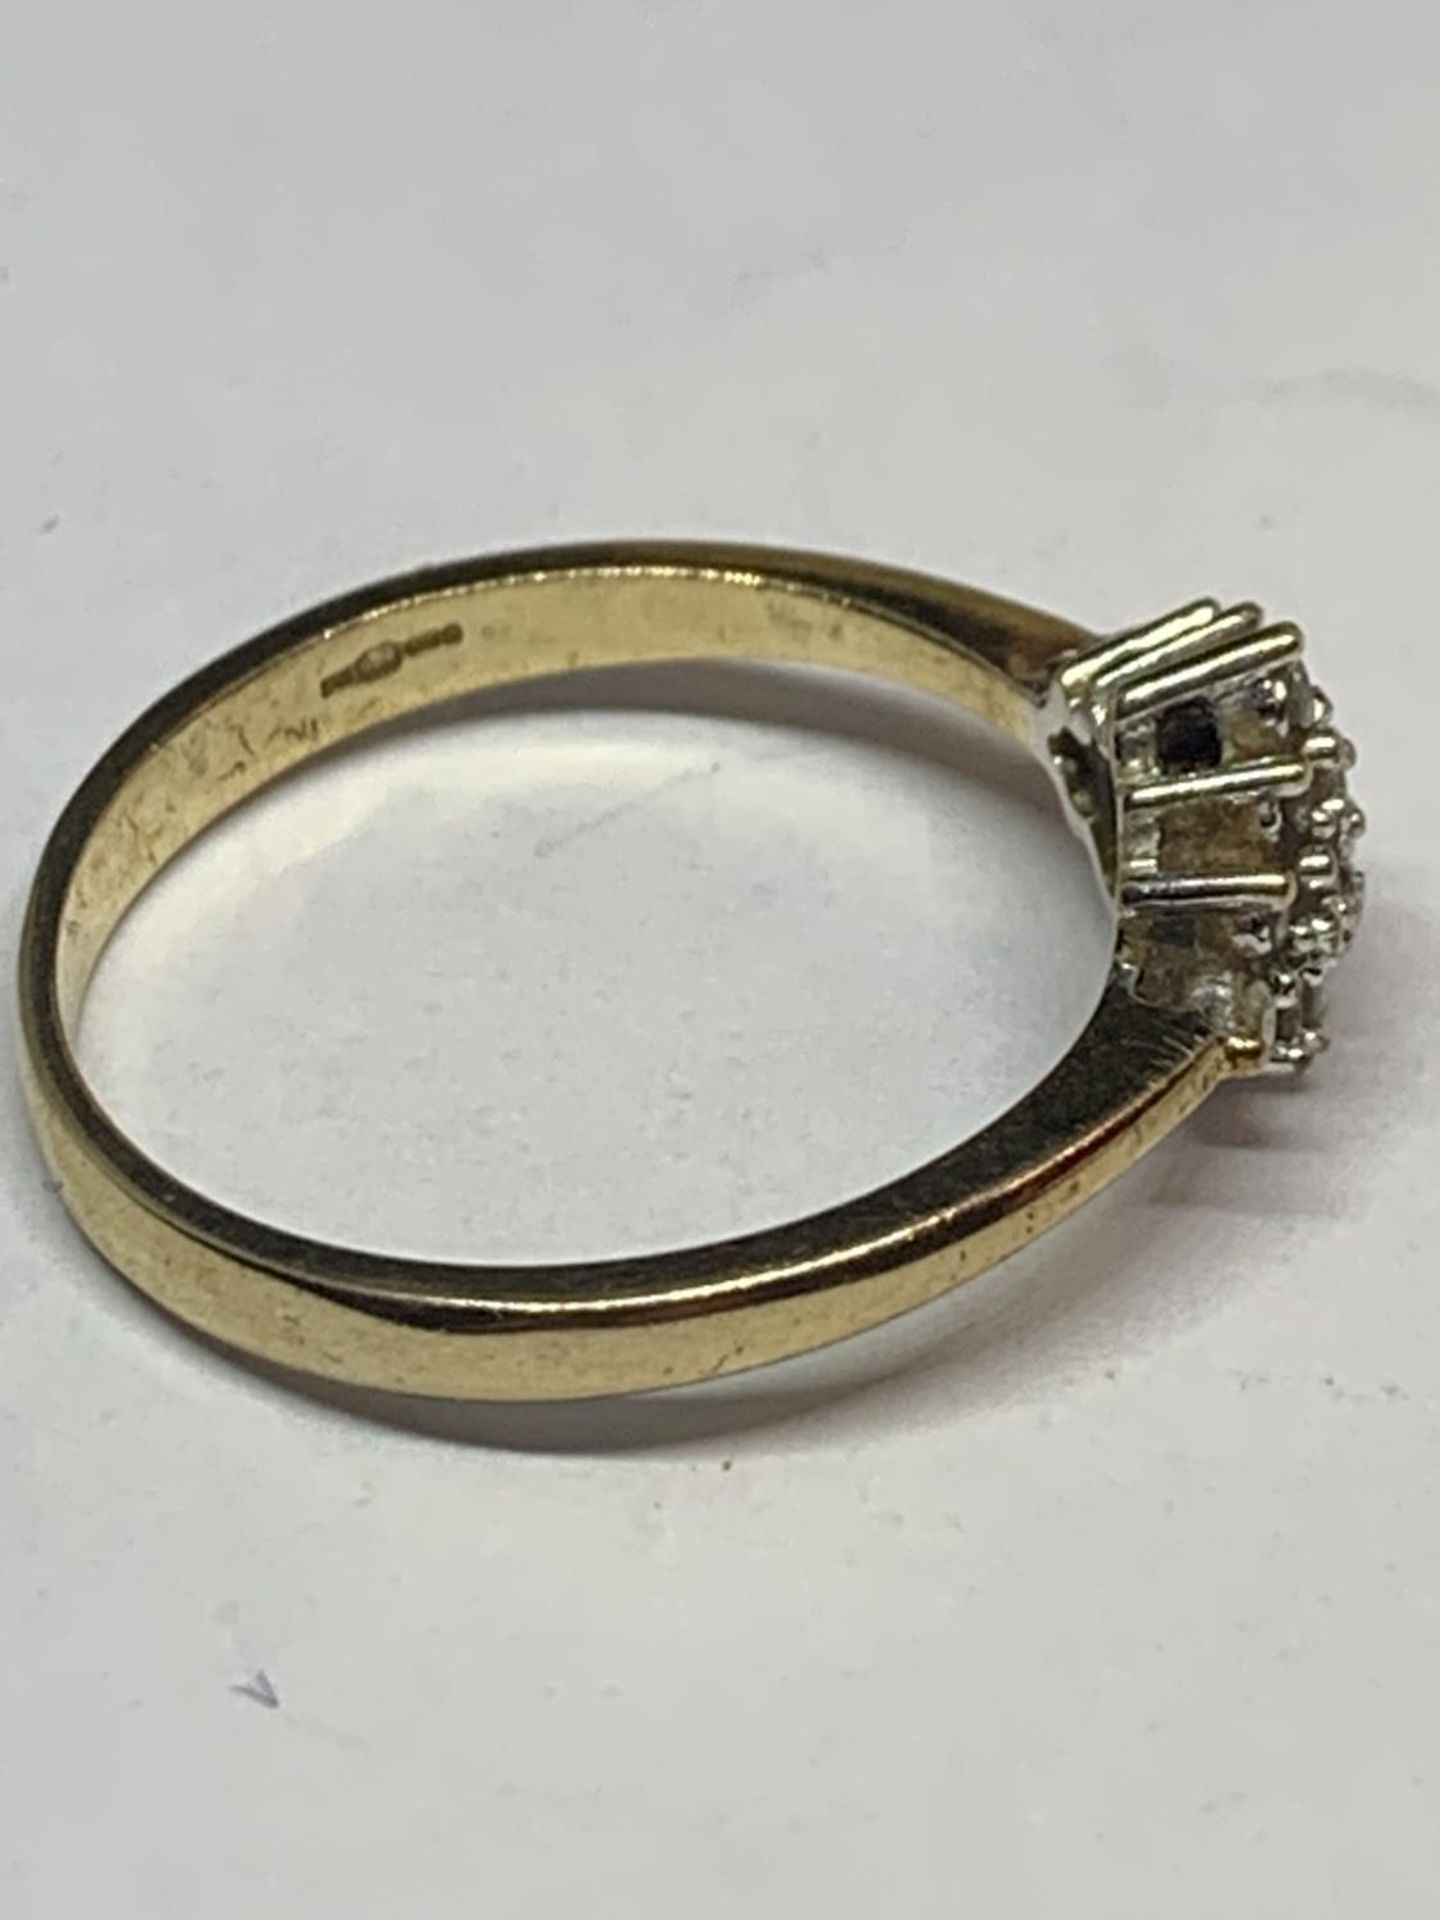 A 9 CARAT GOLD RING WITH DIAMONDS IN A DIAMOND SHAPE DESIGN SIZE 0 WITH PRESENTATION BOX - Image 3 of 5